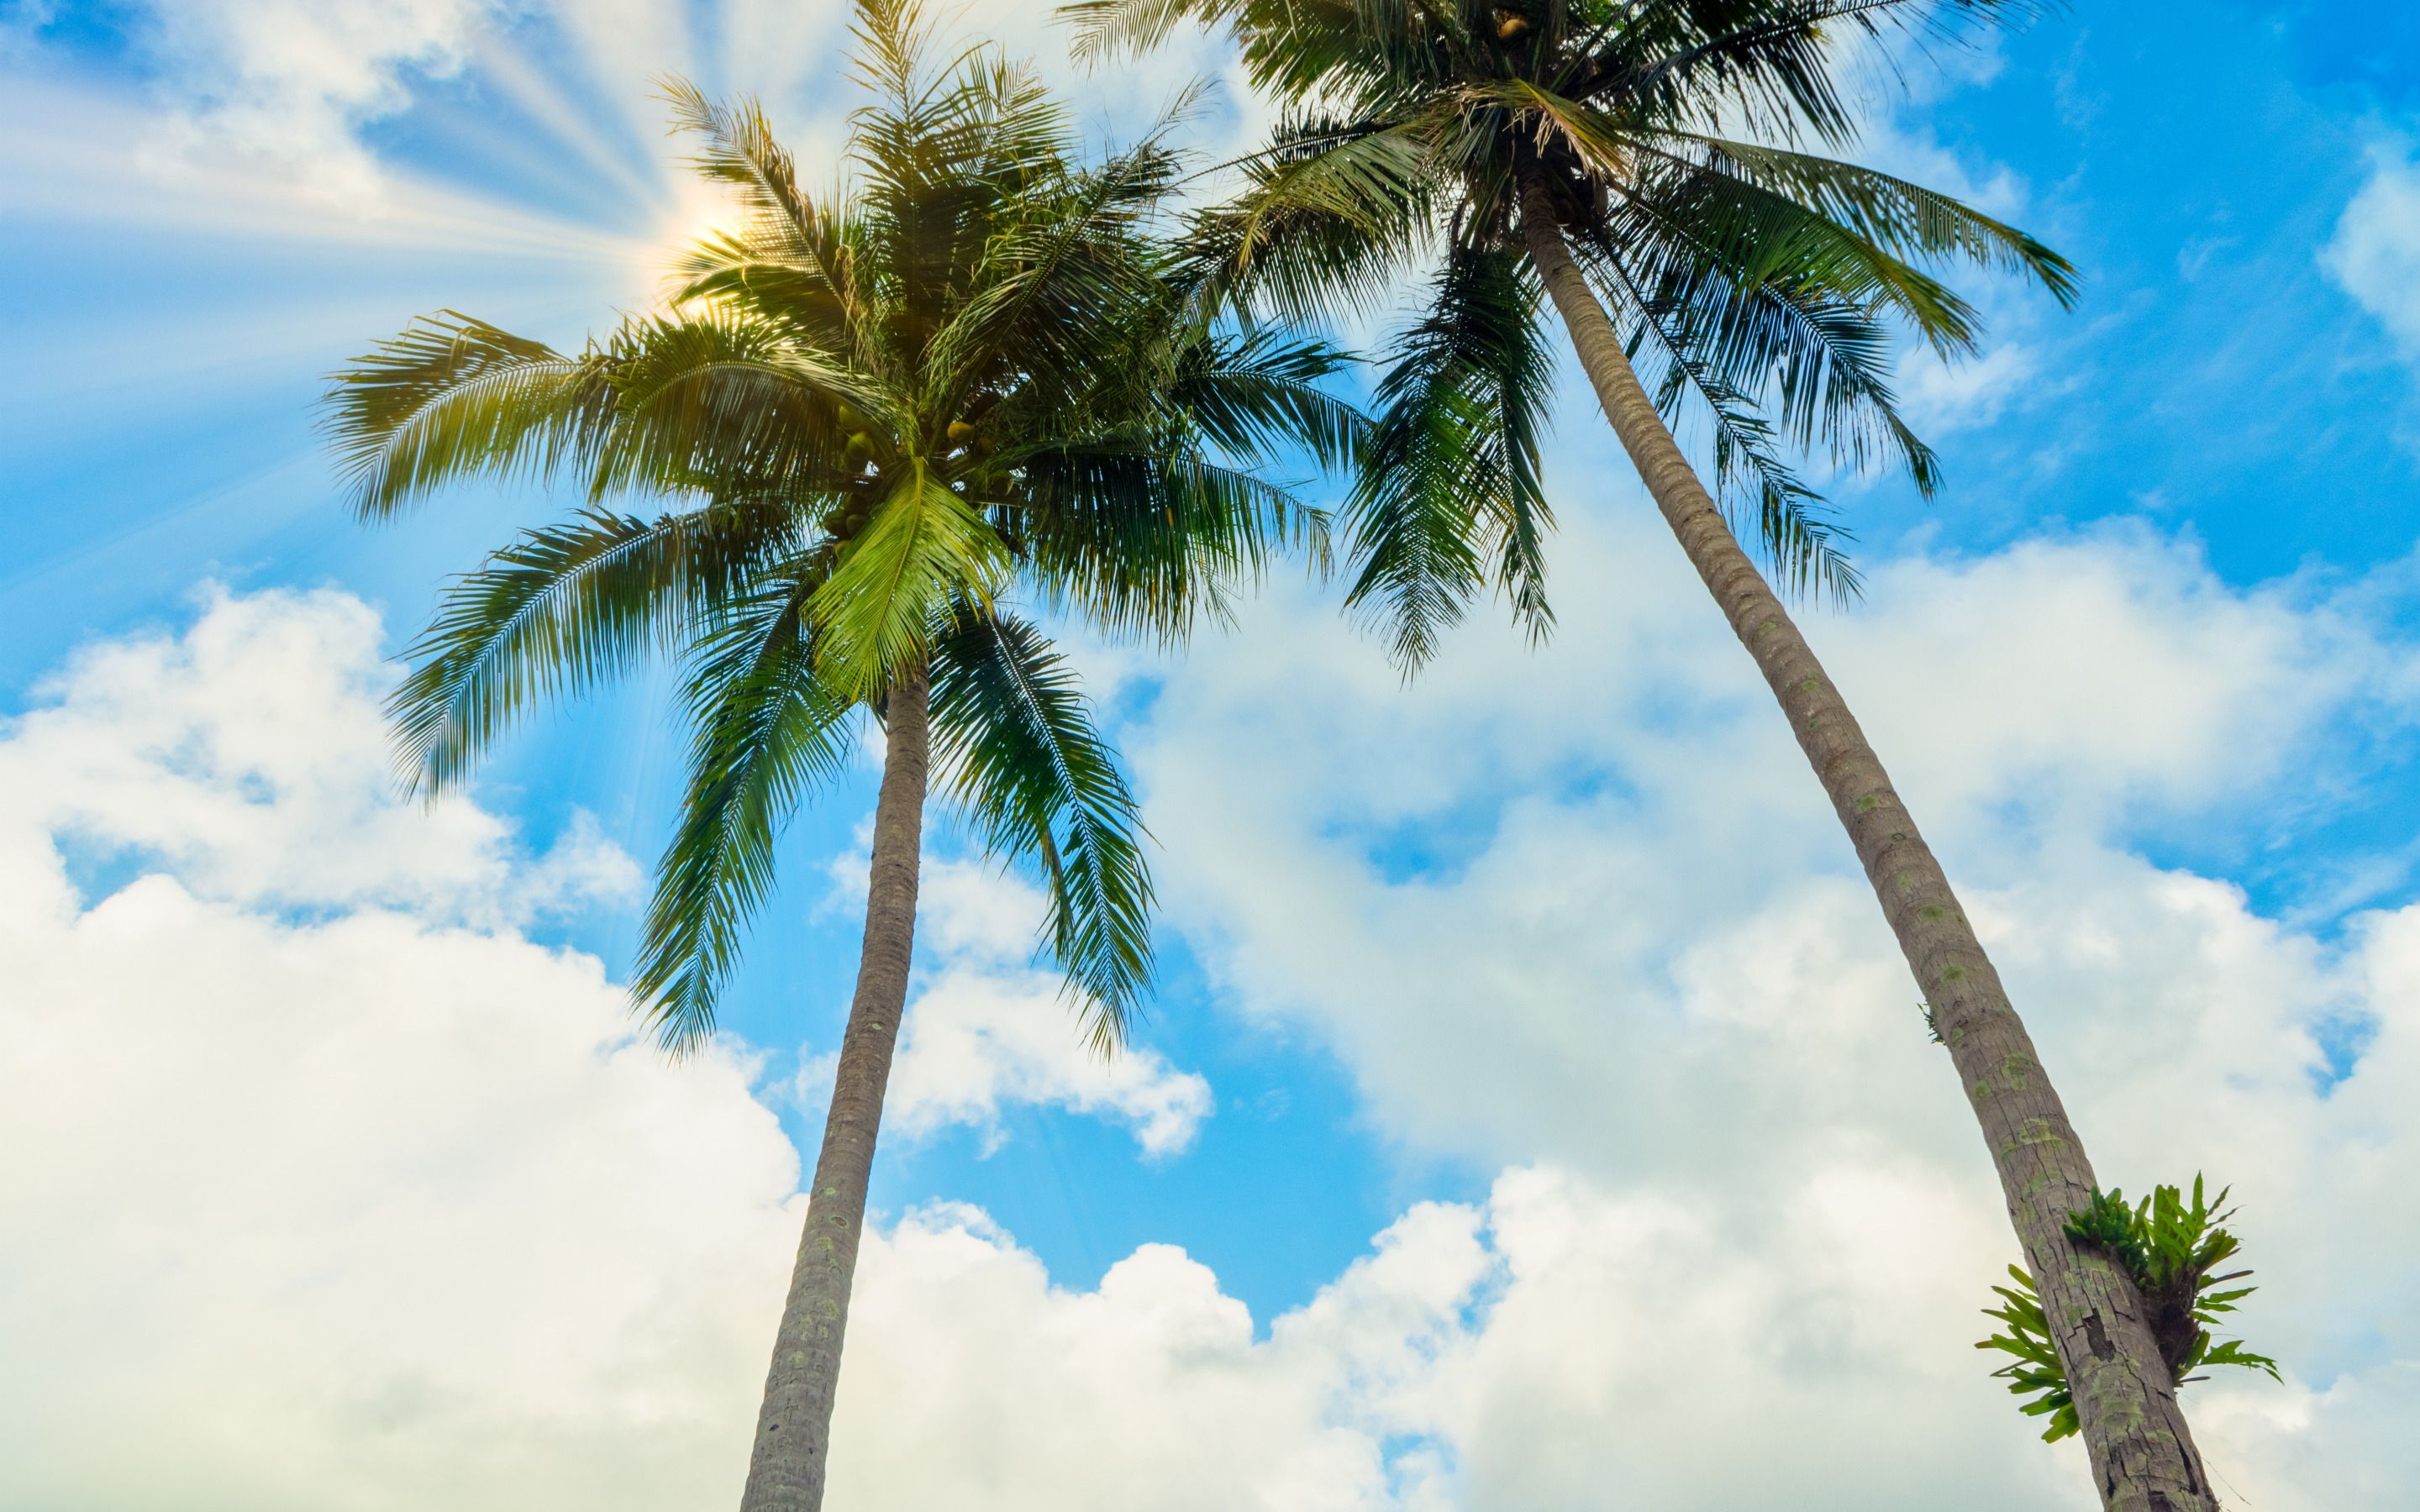 Download wallpaper high palms, view from below, large green palm leaves, tropical island, coconuts on palms, blue sky, summer for desktop with resolution 2880x1800. High Quality HD picture wallpaper